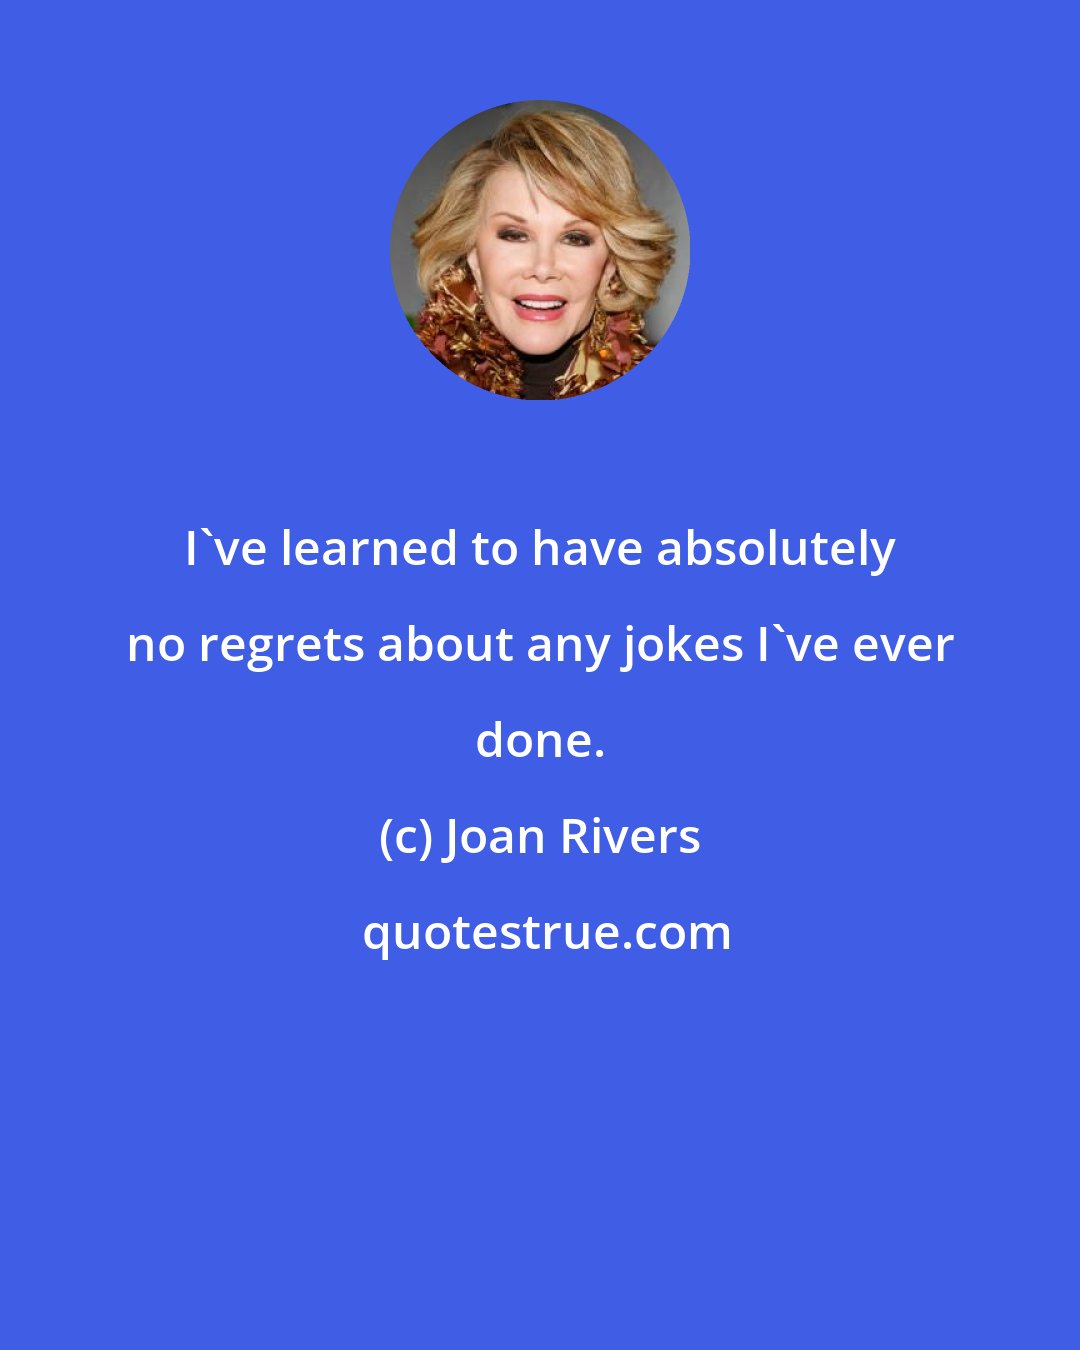 Joan Rivers: I've learned to have absolutely no regrets about any jokes I've ever done.